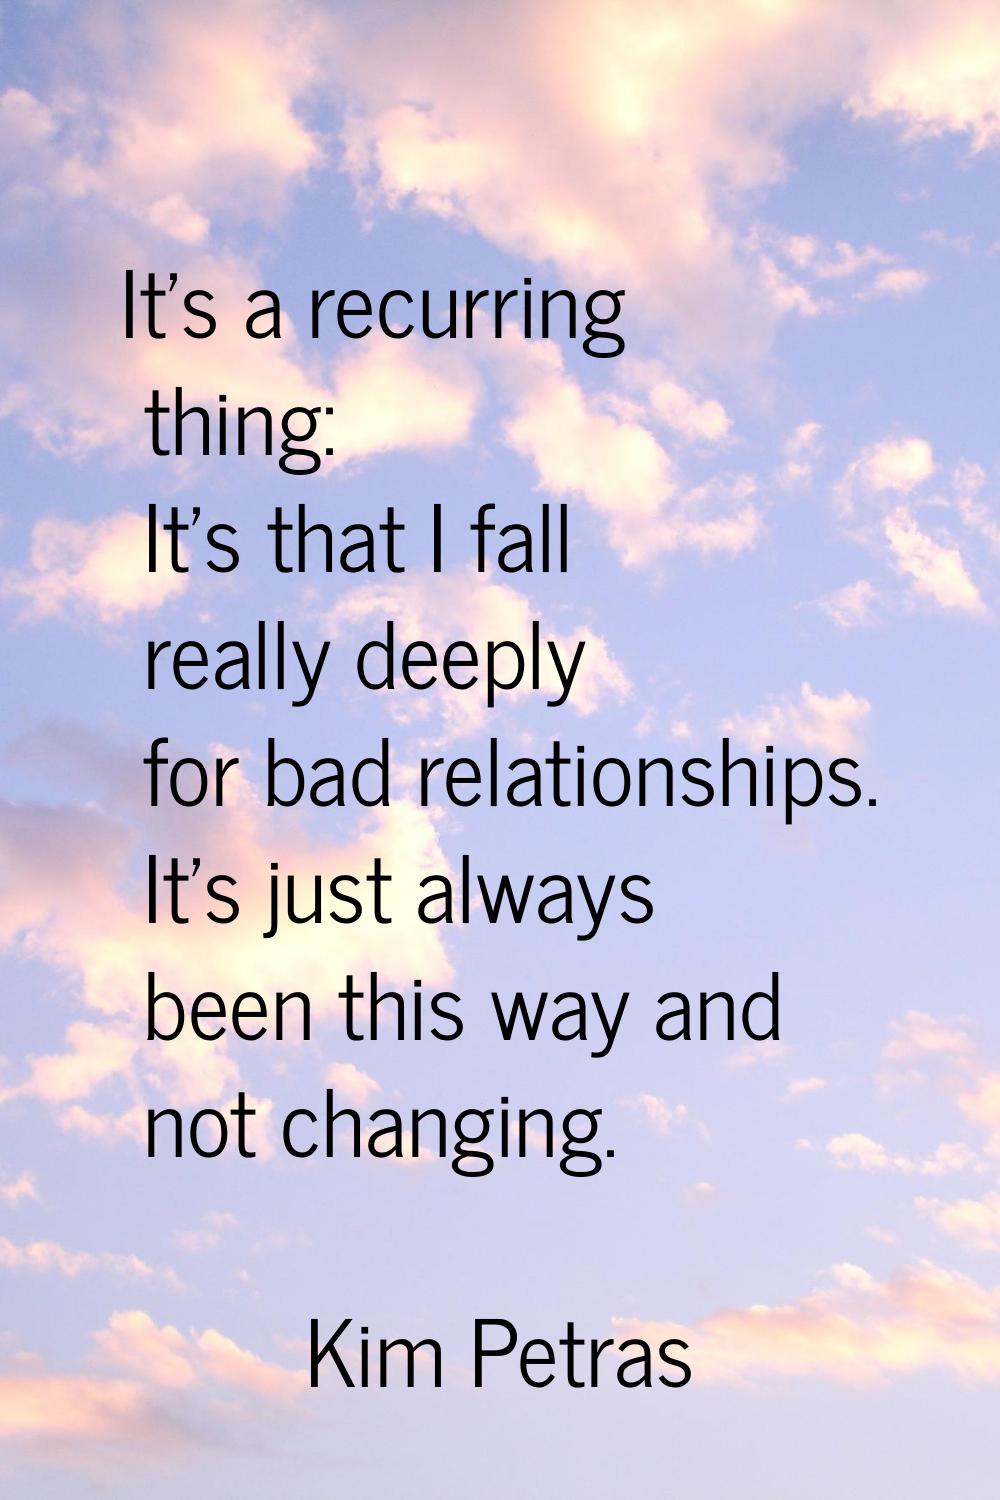 It's a recurring thing: It's that I fall really deeply for bad relationships. It's just always been